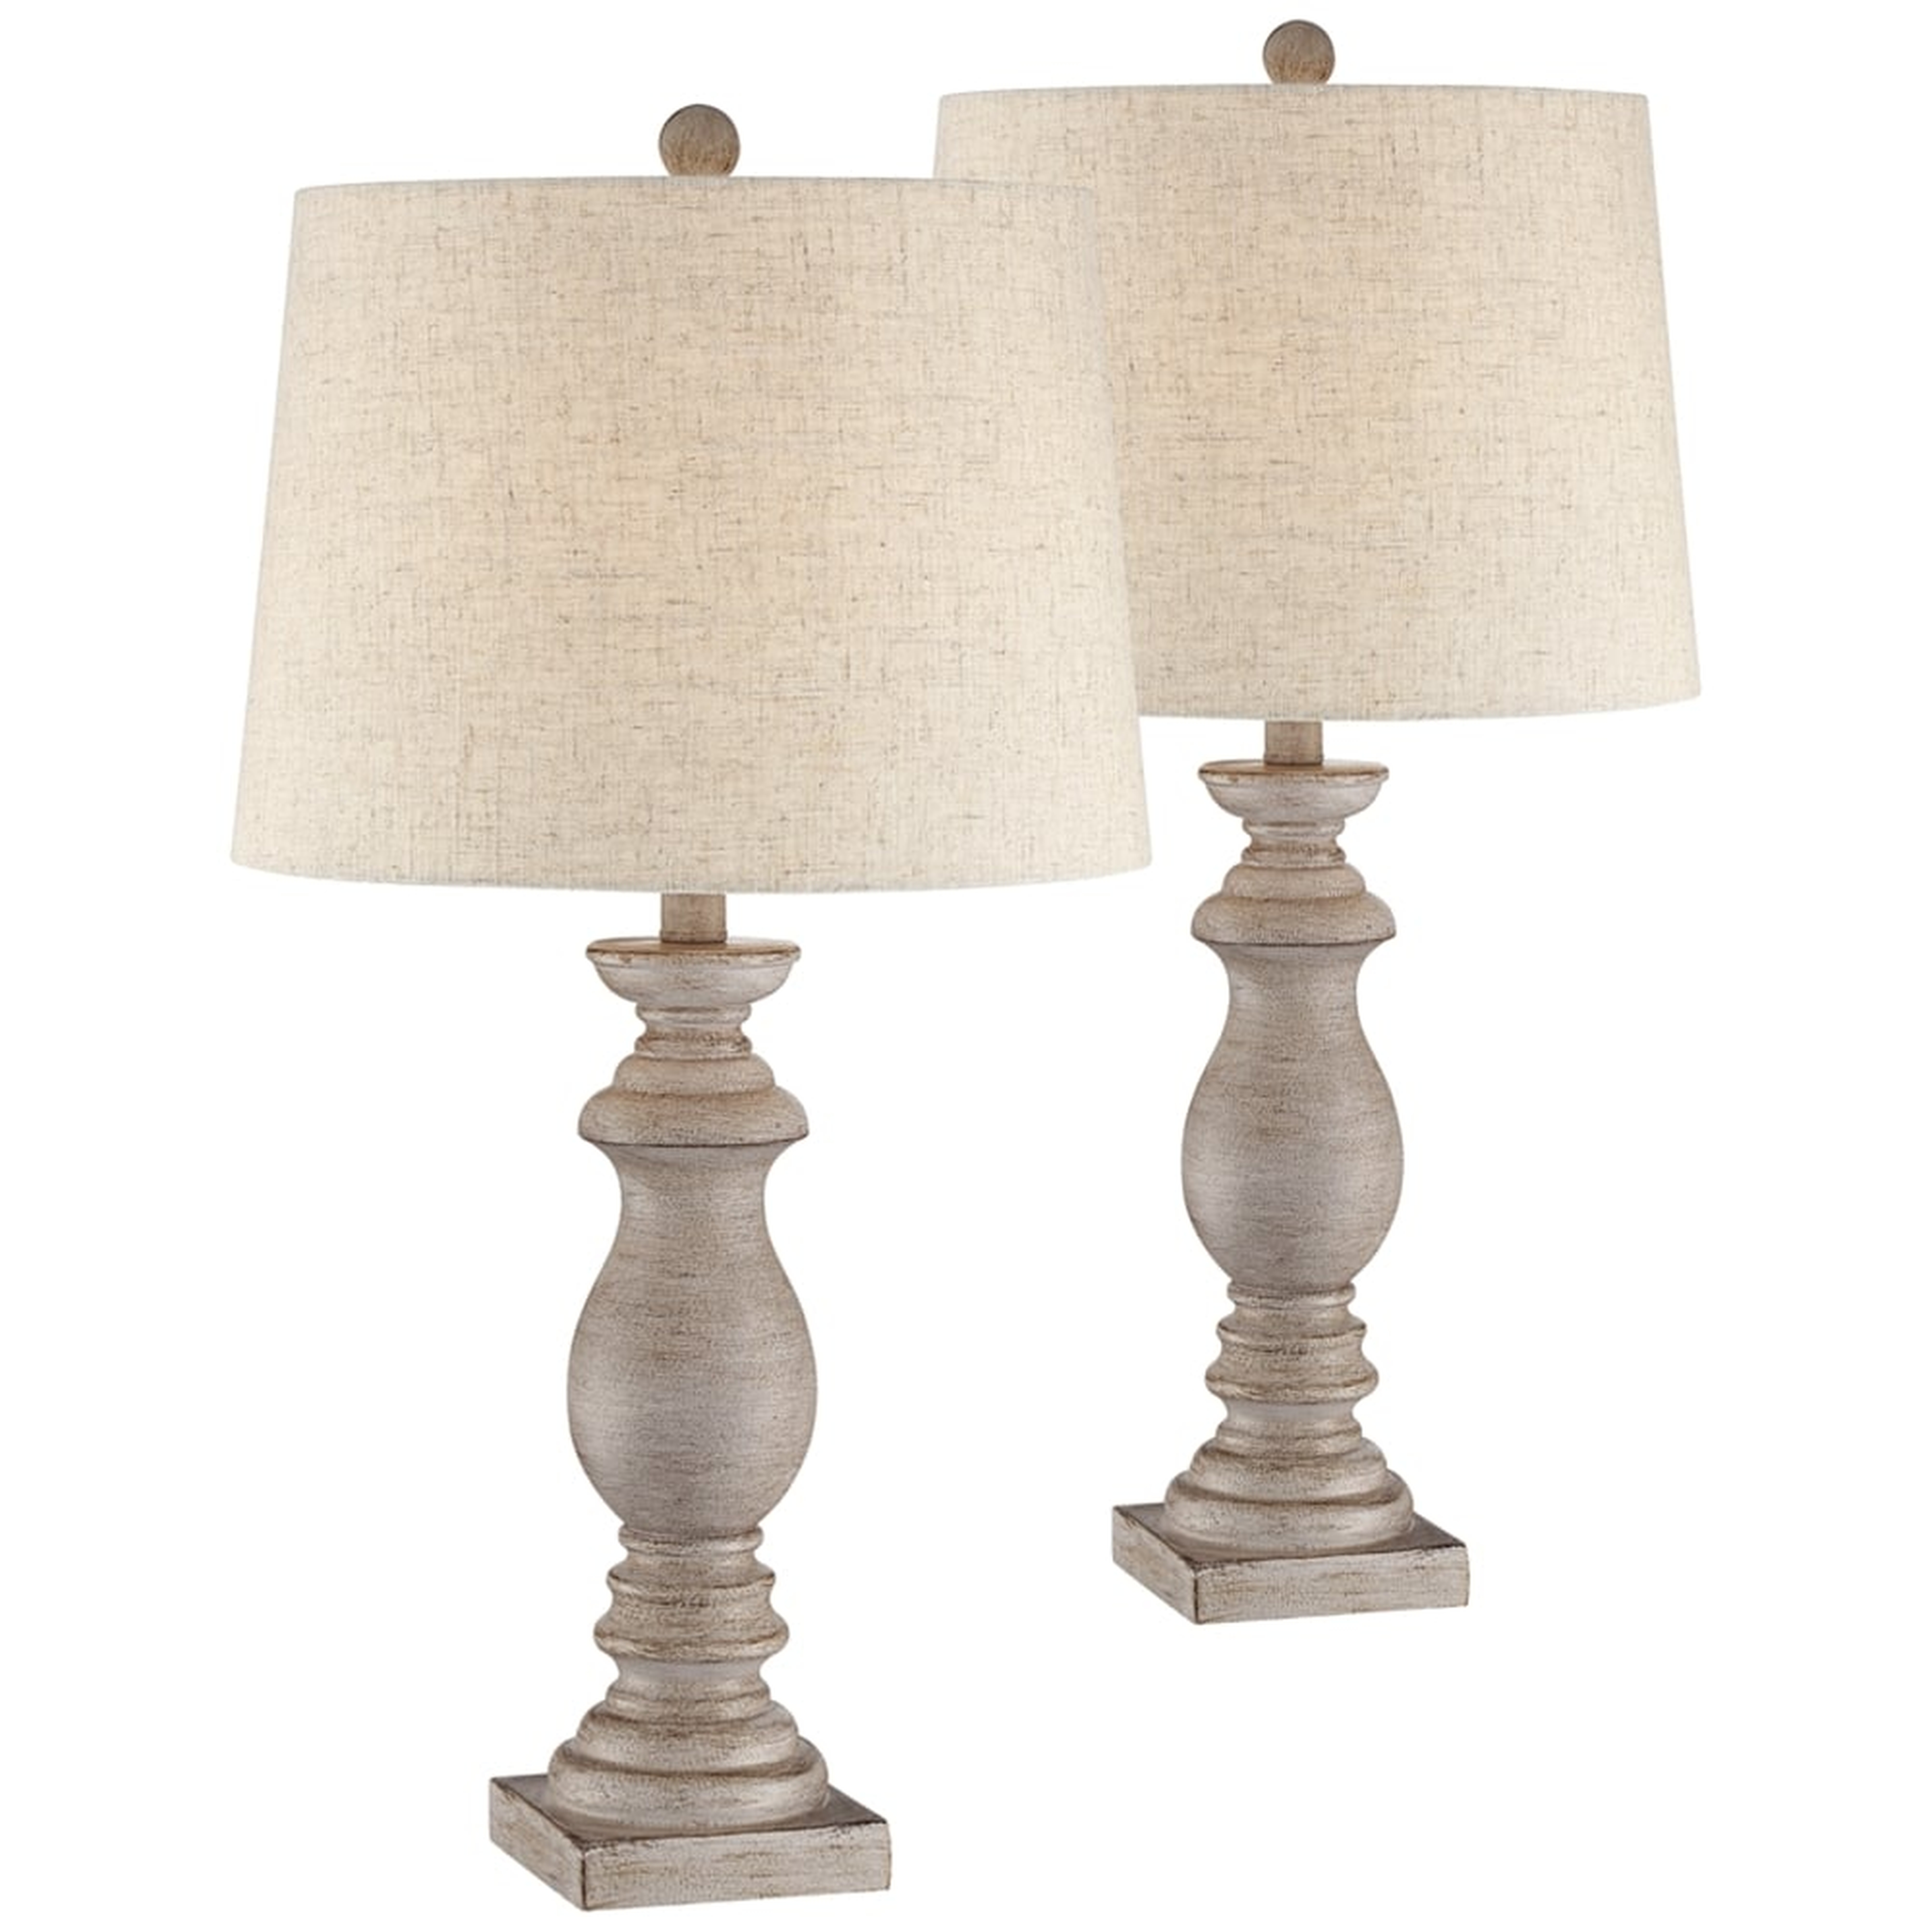 Regency Hill 26 1/2" High White-Washed Faux Wood Table Lamps Set of 2 - Lamps Plus